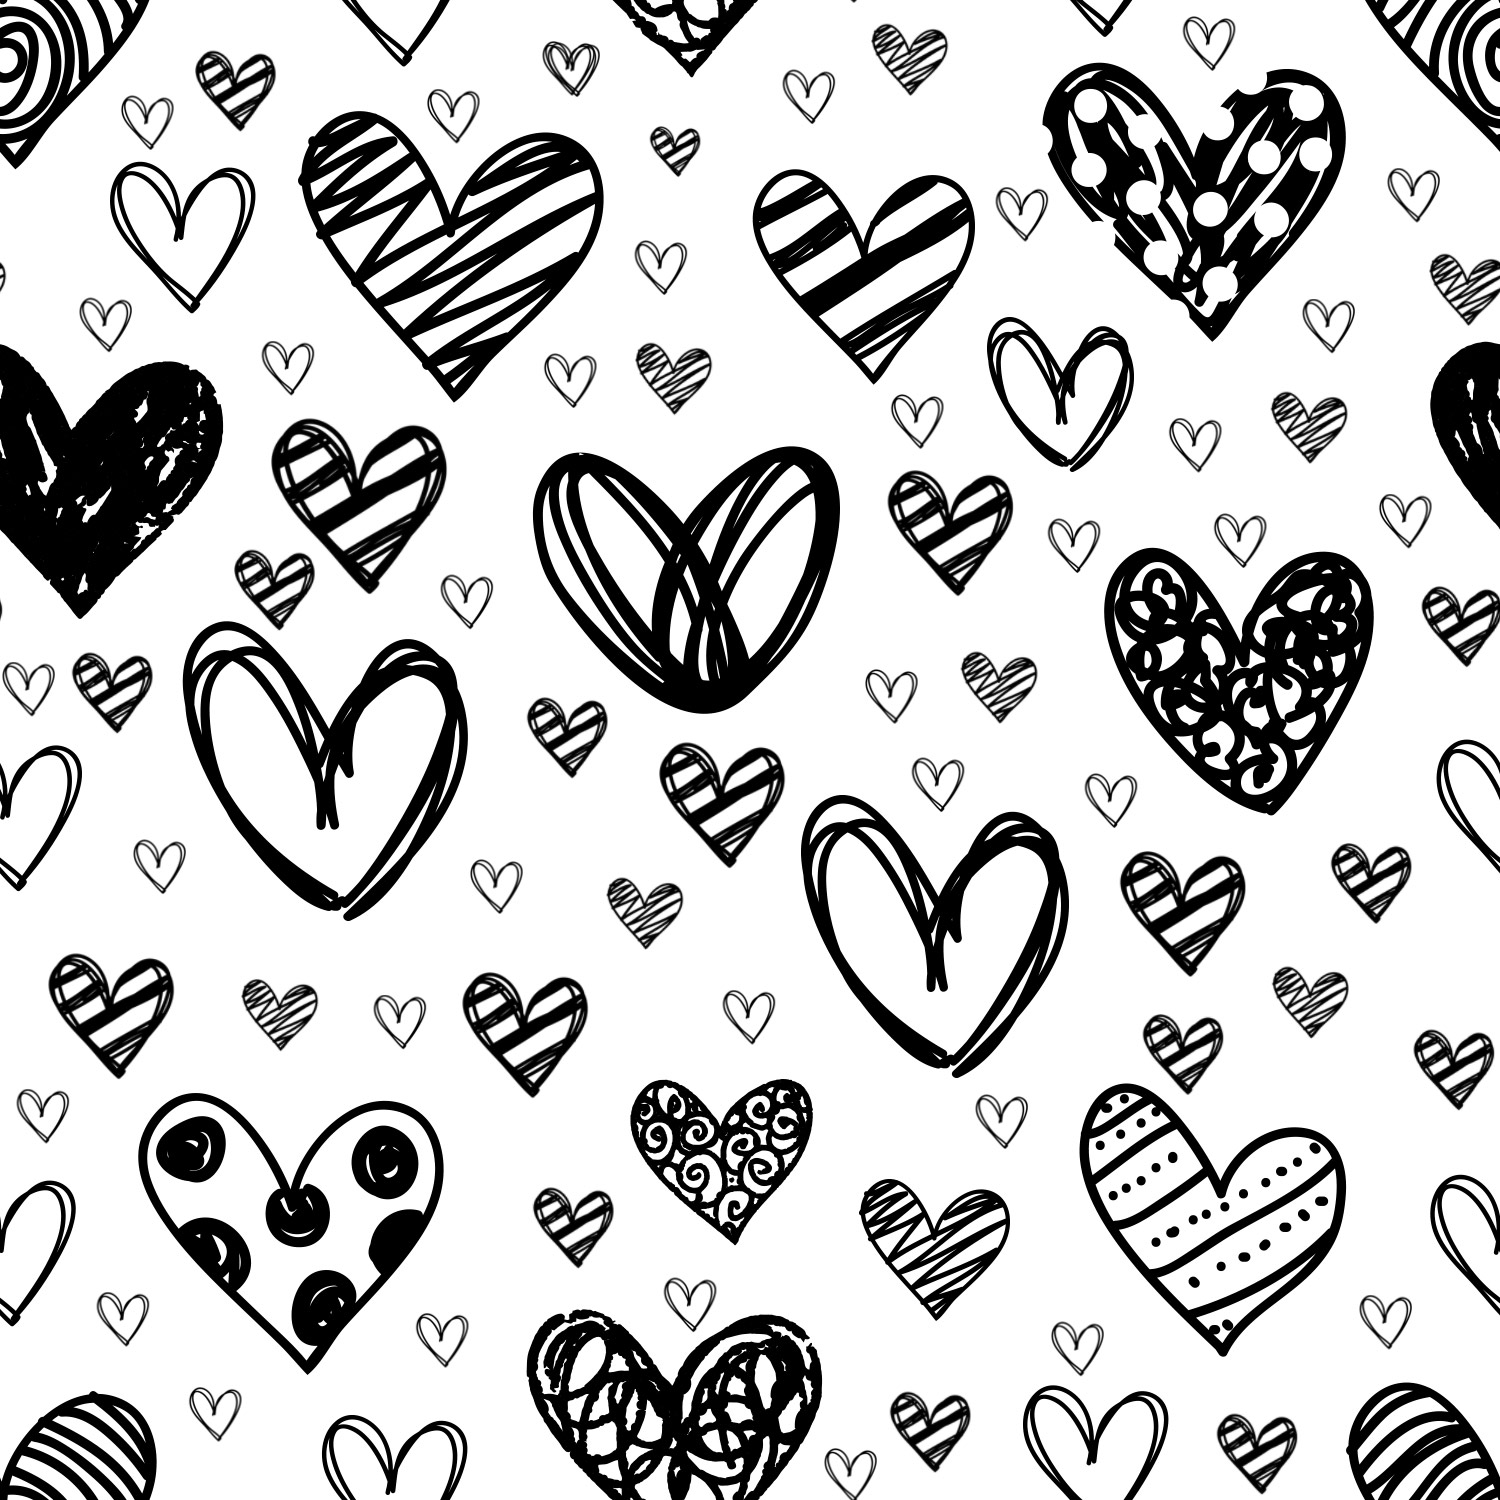 adobe photoshop heart brushes free download